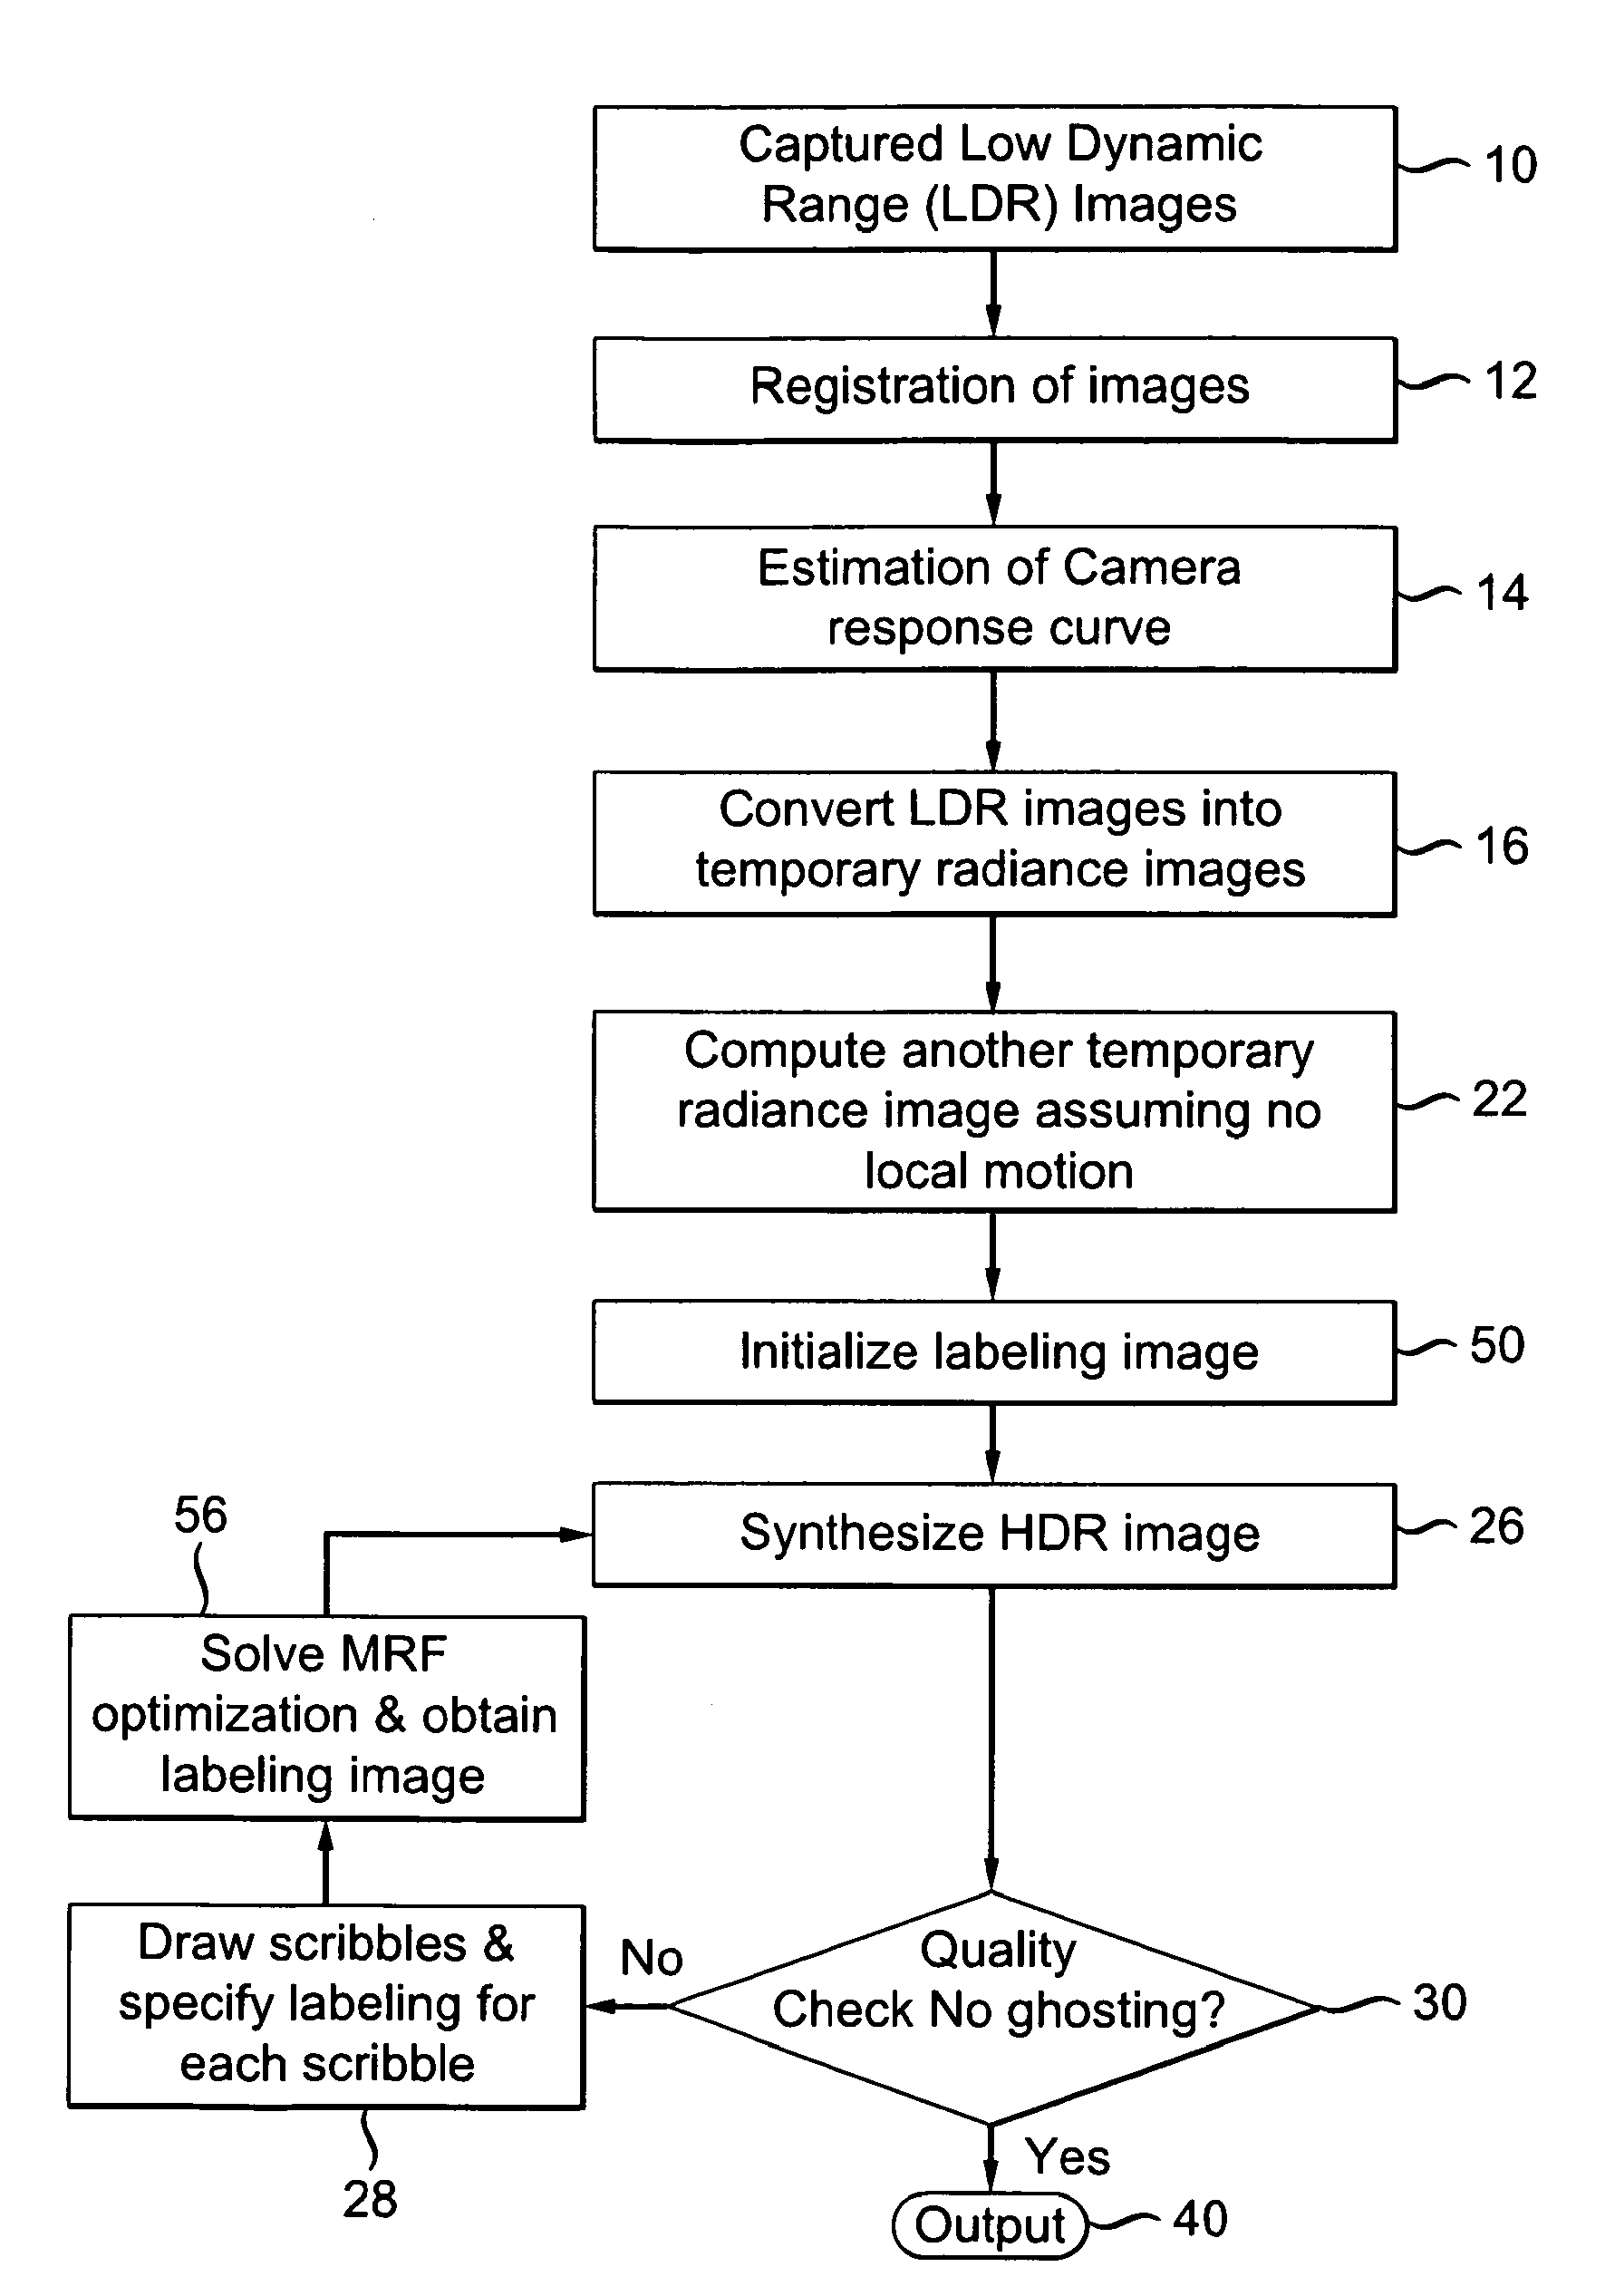 High dynamic range (HDR) image synthesis with user input